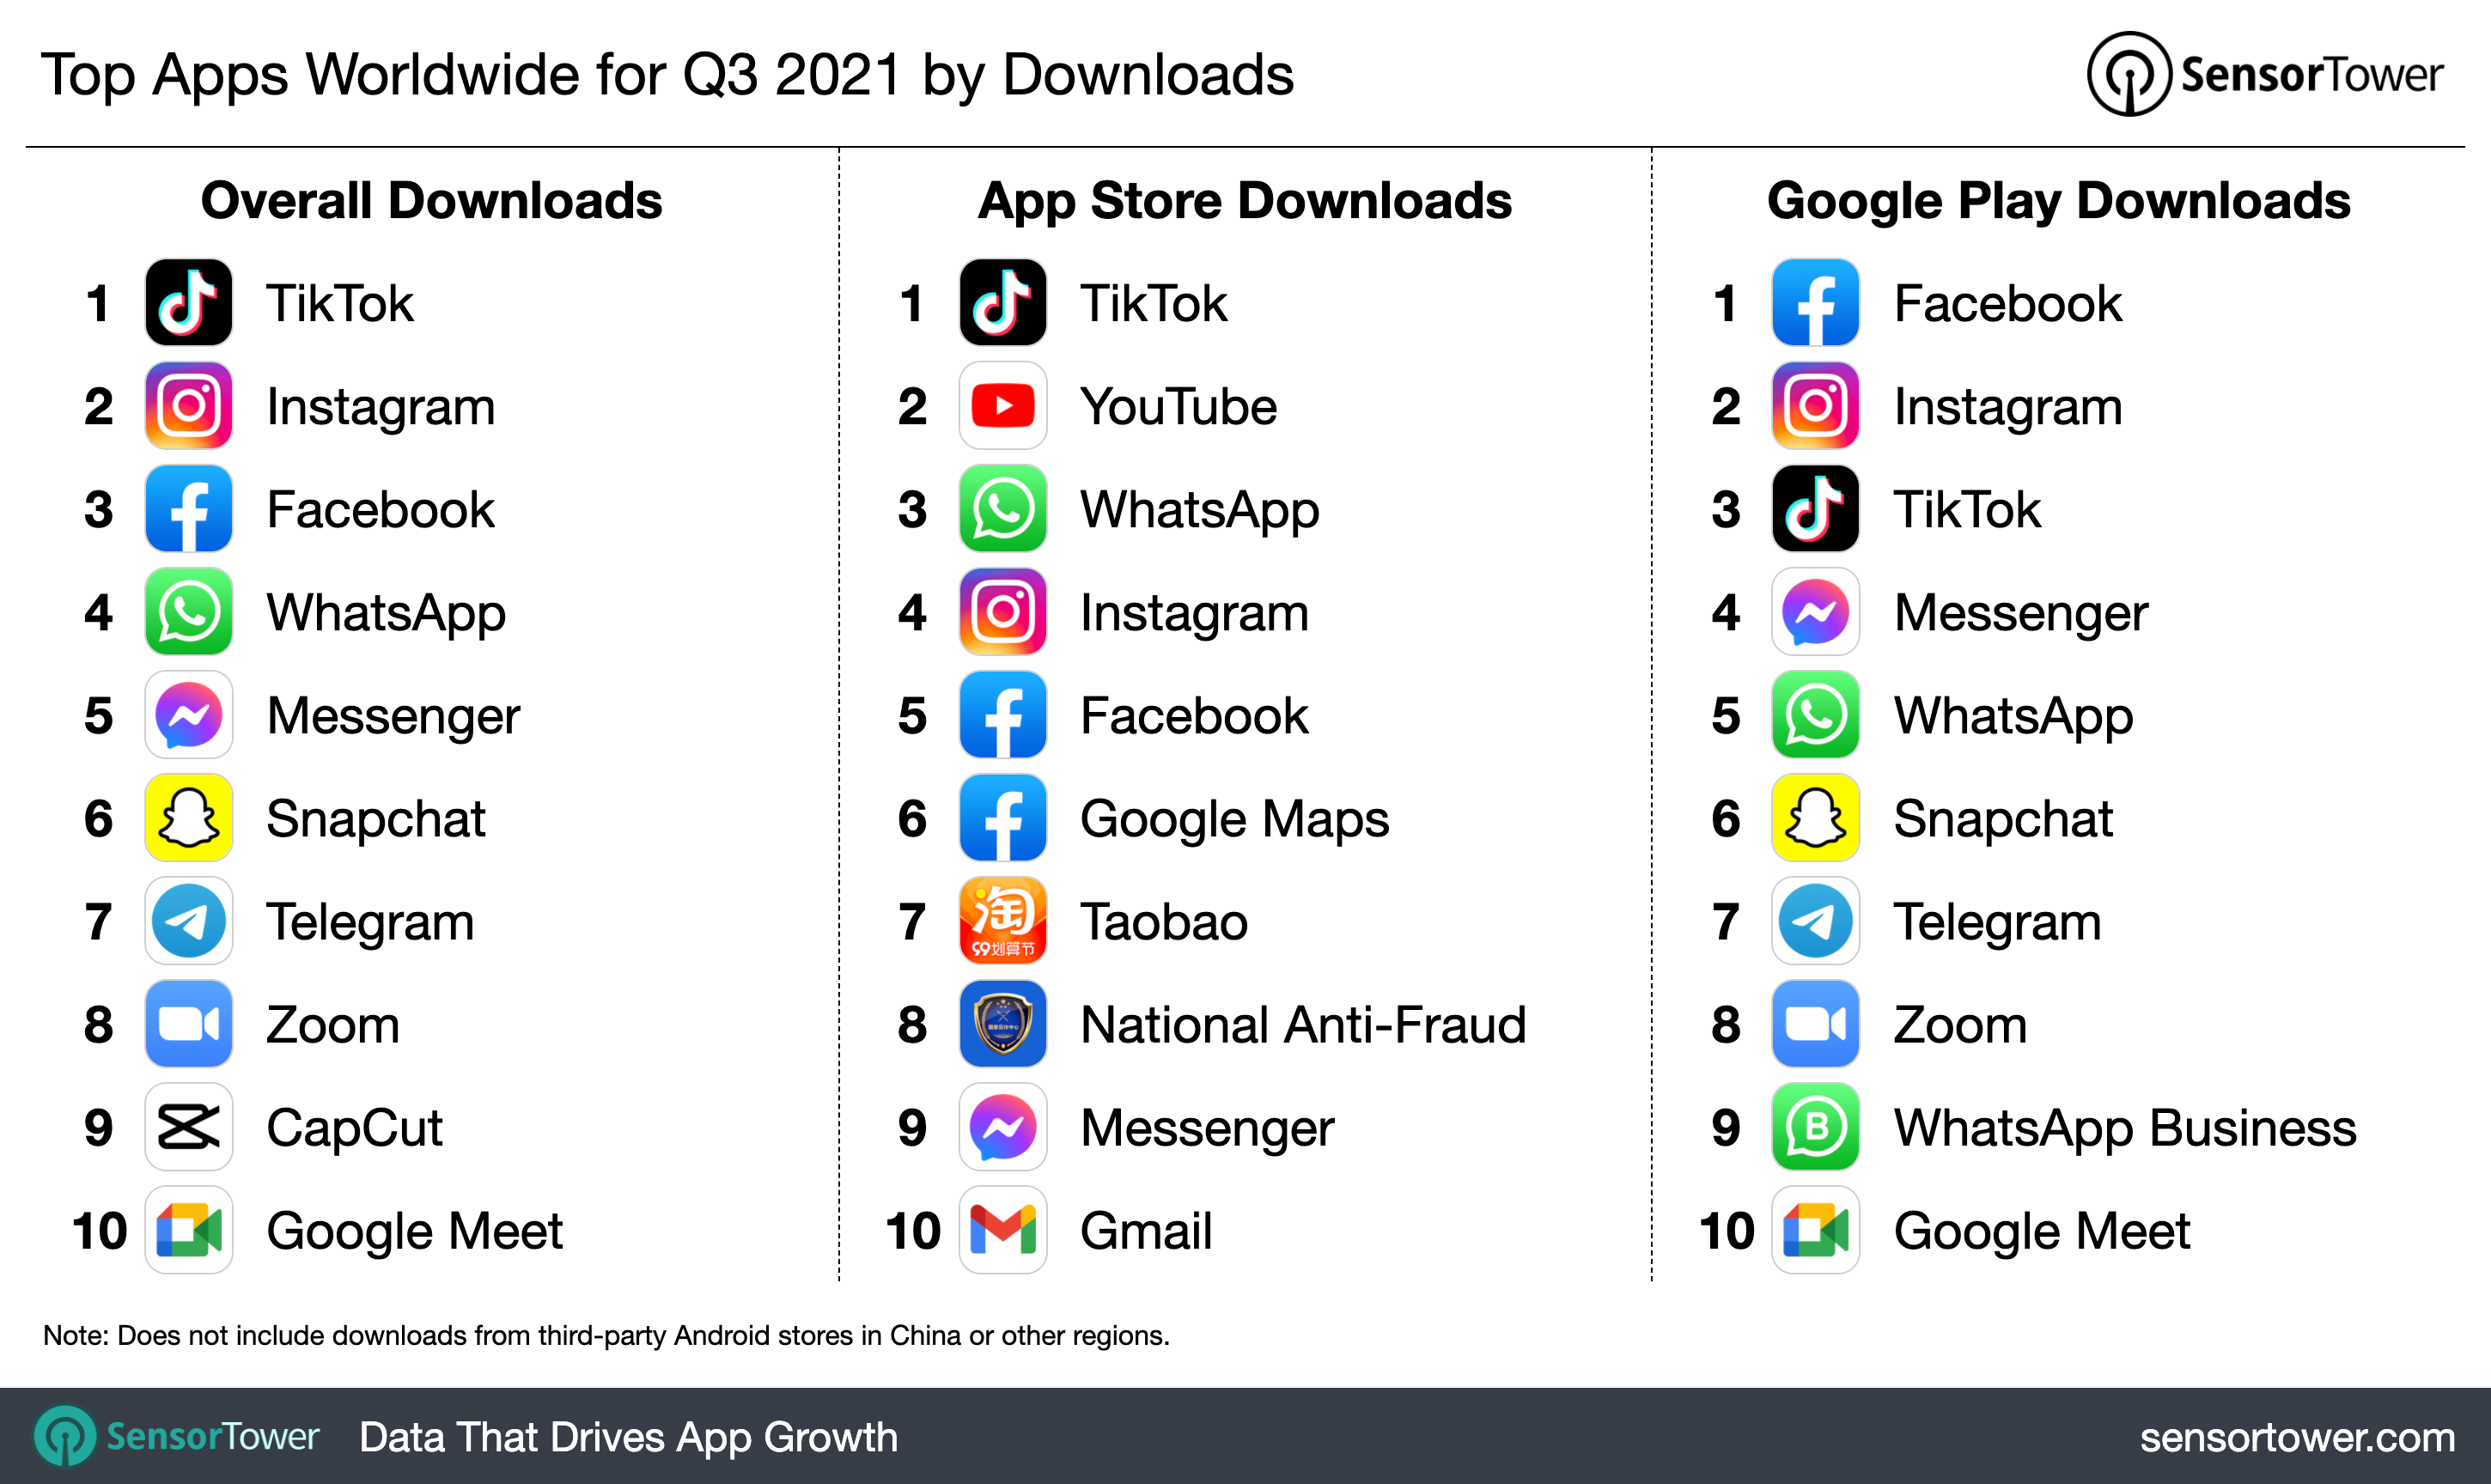 TikTok was the most downloaded app across both stores in 3Q21.